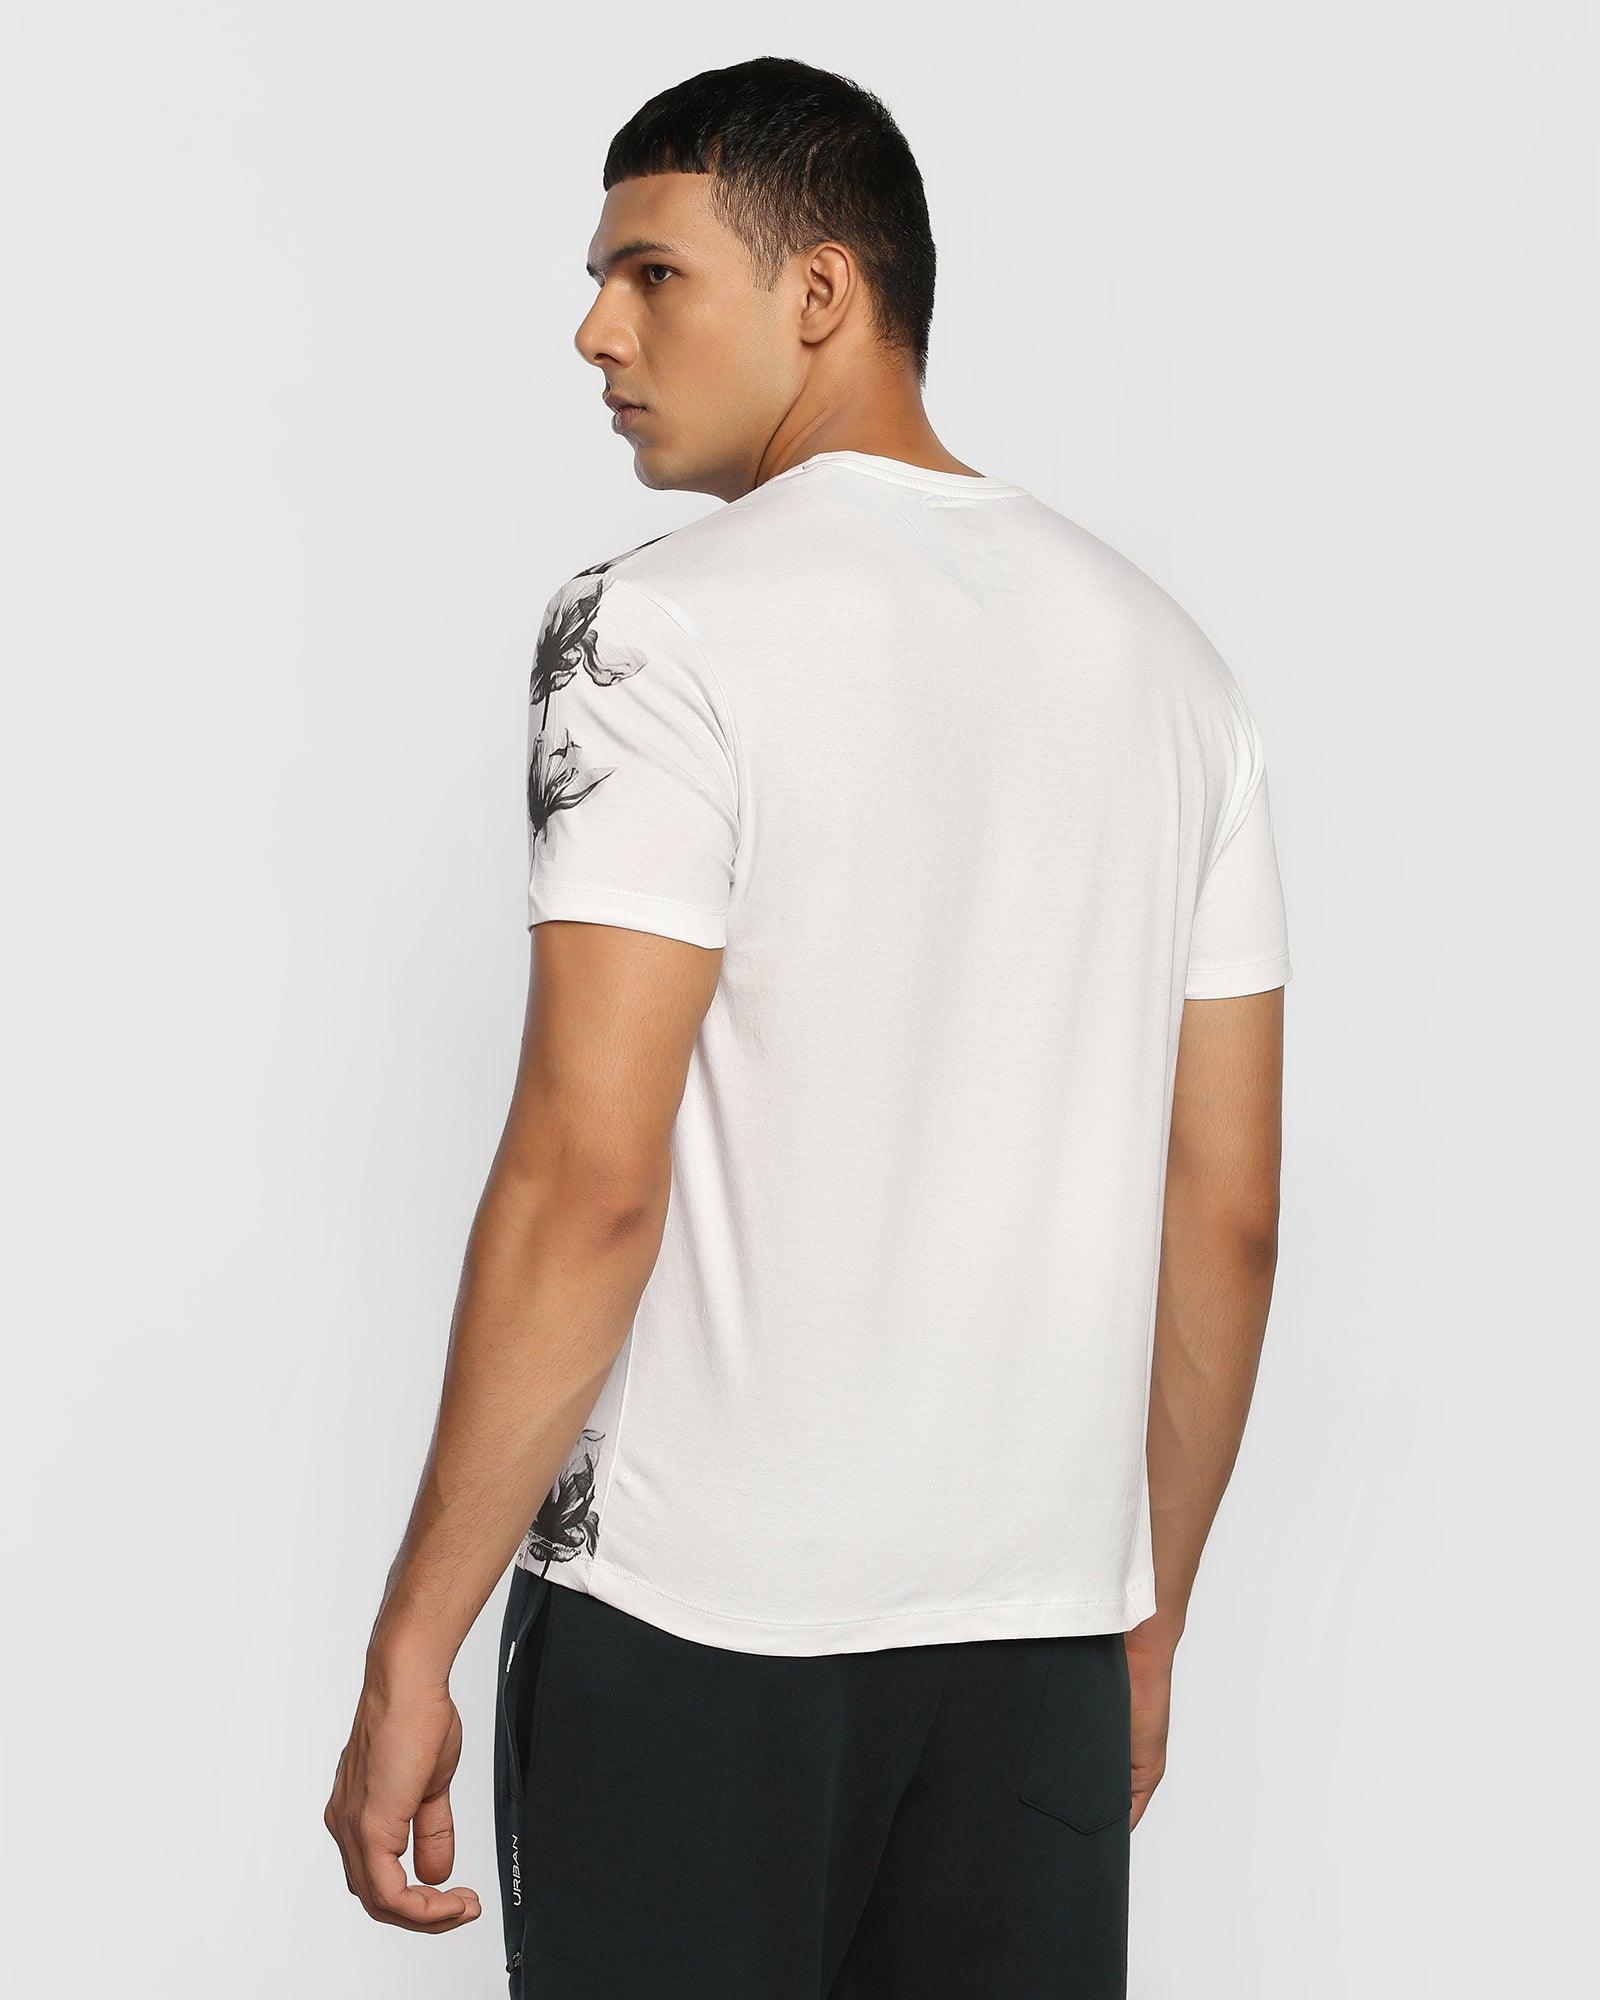 Crew Neck White Printed T Shirt - Dispersed